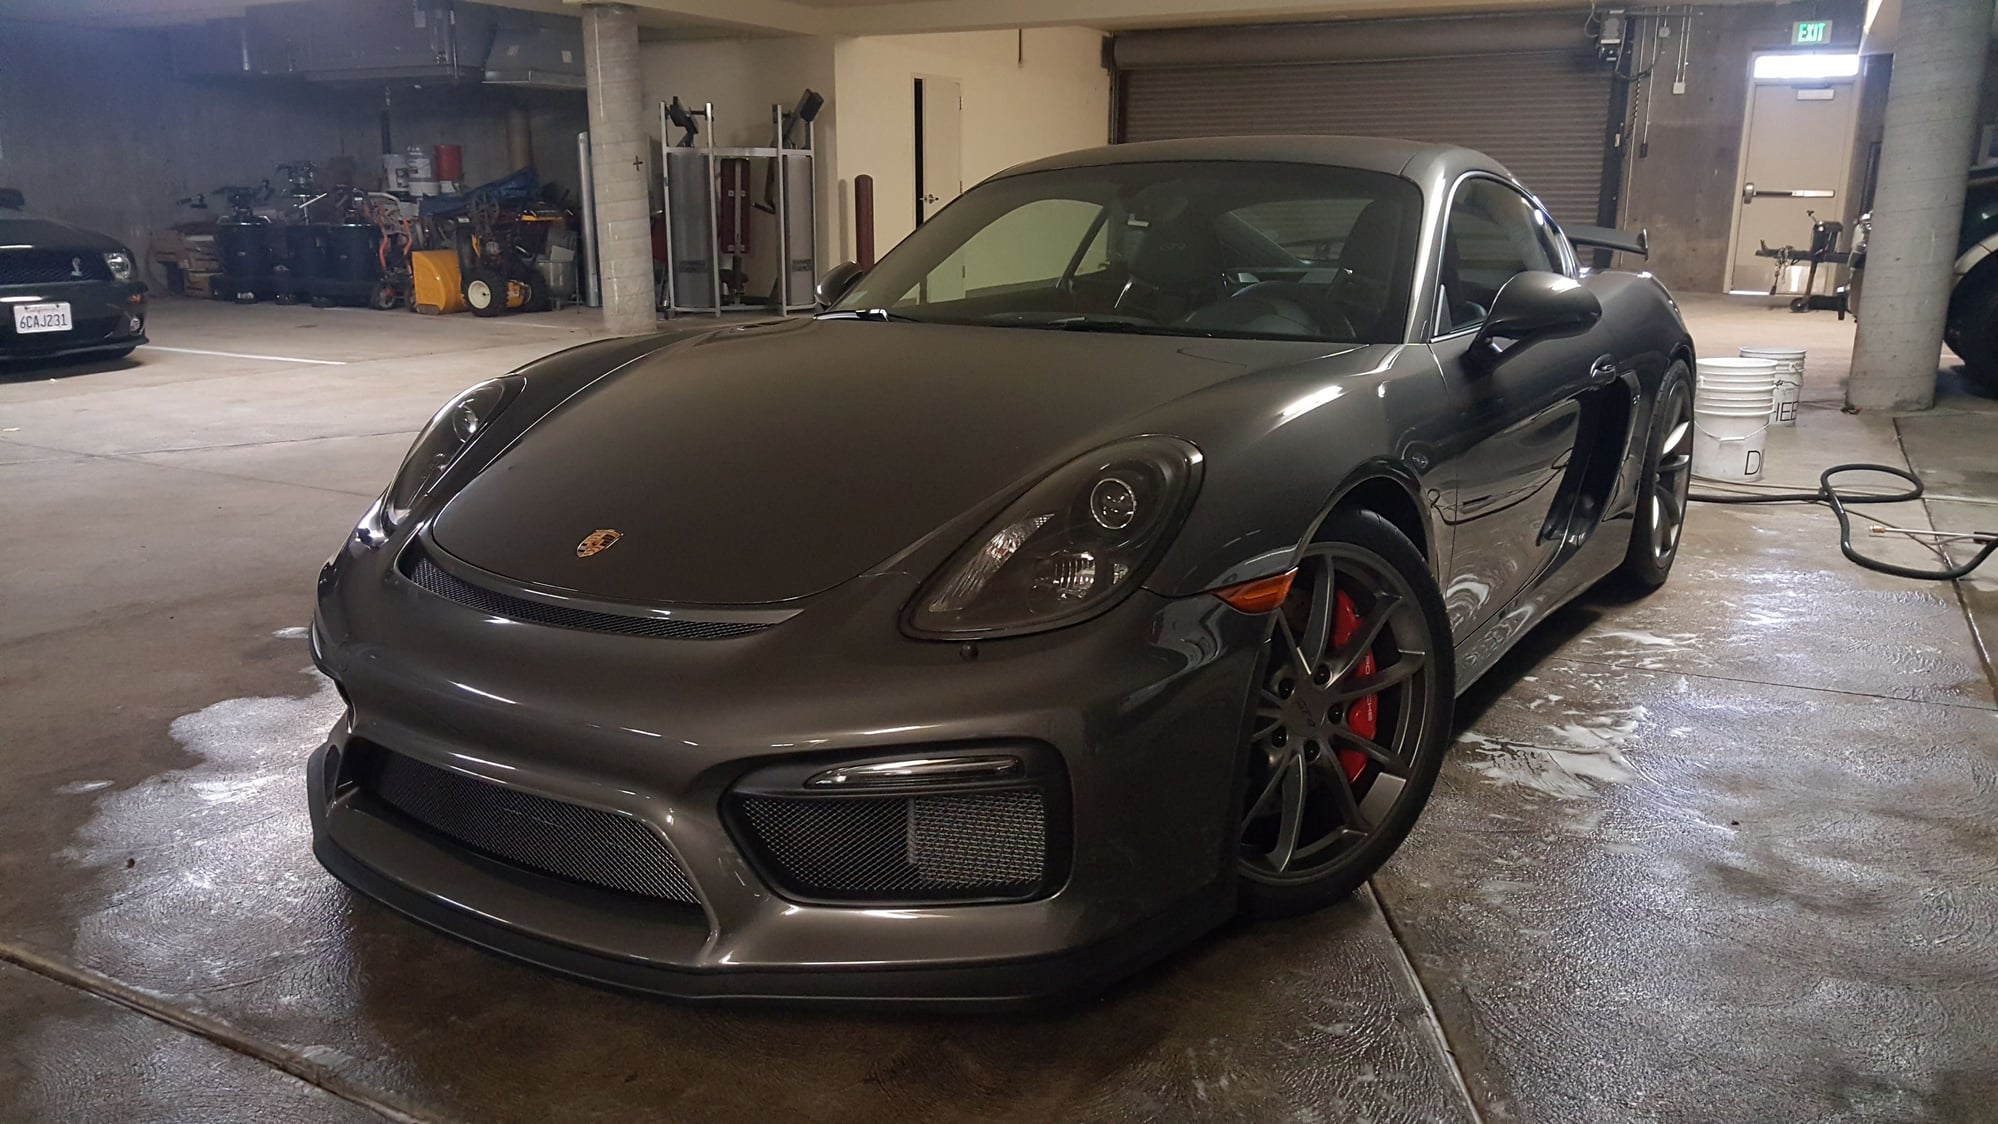 2016 Porsche Cayman GT4 - 2016 Porsche Cayman GT4 Agate LWB 1800 miles, Excellent condition, $120,000 - Used - VIN WP0AC2A81GK191681 - 1,800 Miles - 6 cyl - 2WD - Manual - Coupe - Gray - Steamboat Springs, CO 80487, United States